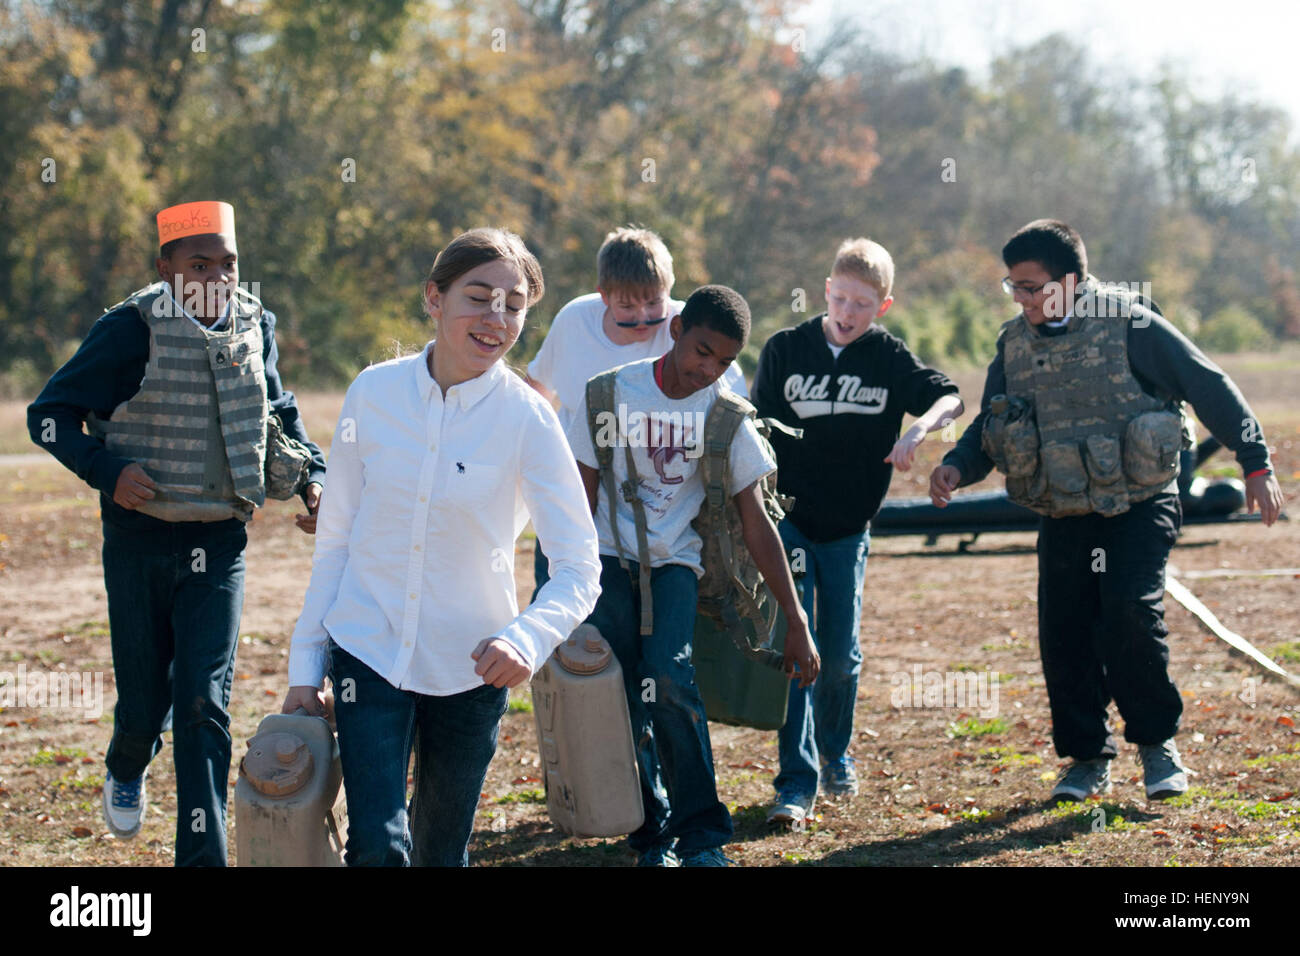 Students from West Creek Middle School in Clarksville, Tenn., carry water cans as part of an obstacle course set up by the 551st Military Police Company, 716th Military Police Battalion, 16th Military Police Brigade, supported by the 101st Sustainment Brigade, 101st Airborne Division, for a Veterans Day event Nov. 7 at West Creek Middle School. The school partnered with the MP battalion to honor veterans and to give students an opportunity to participate in different events to show students what it’s like to be part of the U.S. Army. (U.S. Army photo by Sgt. Leejay Lockhart, 101st Sustainment  Stock Photo